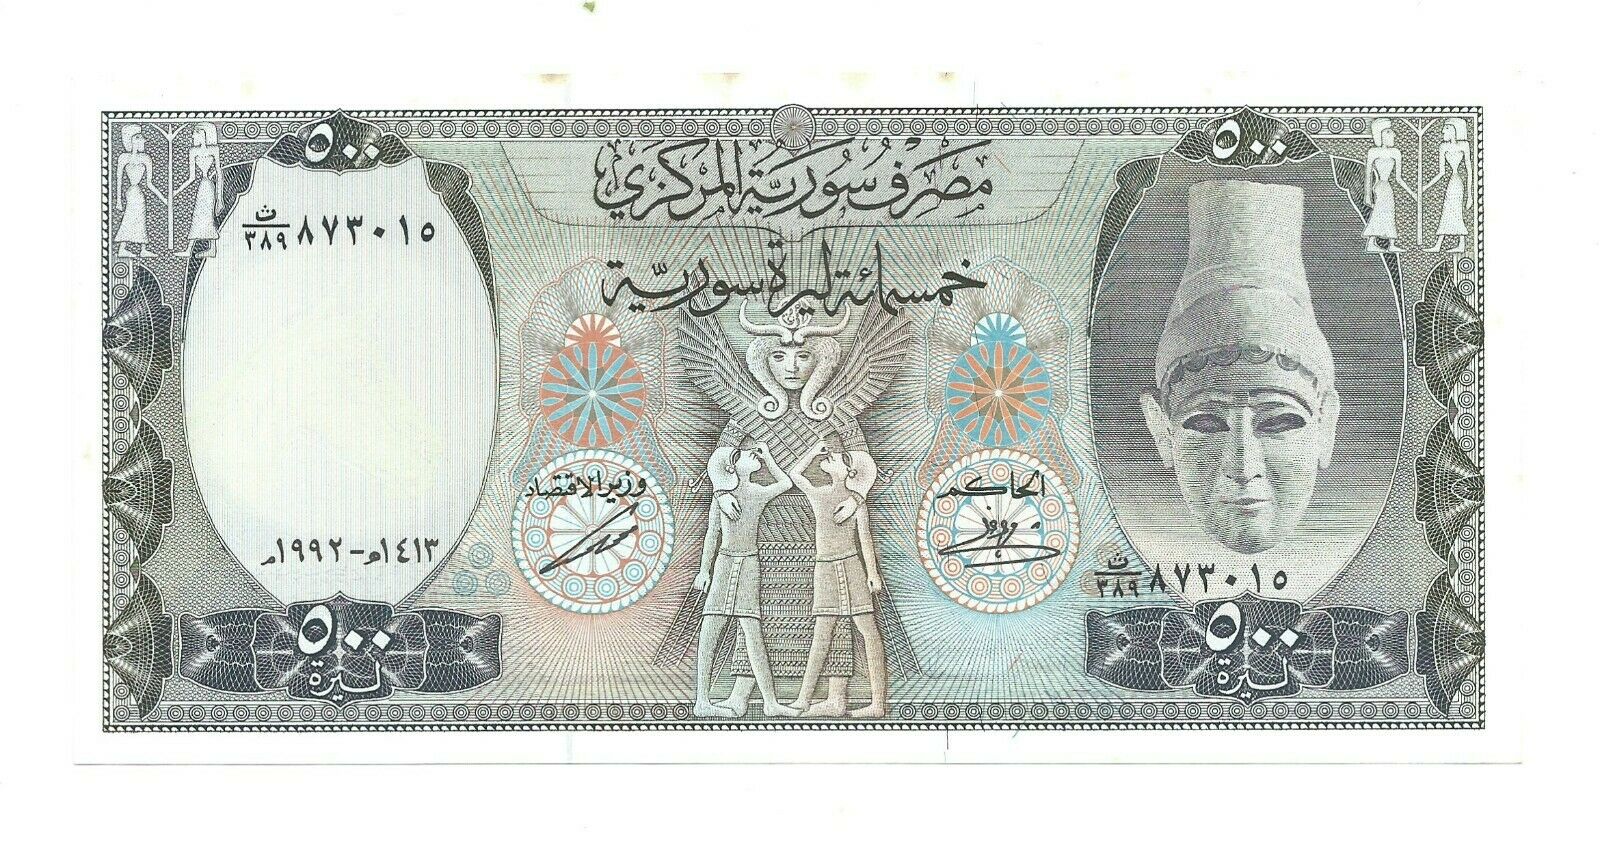 1992 Syria Banknote Collector 50 Pounds # 105